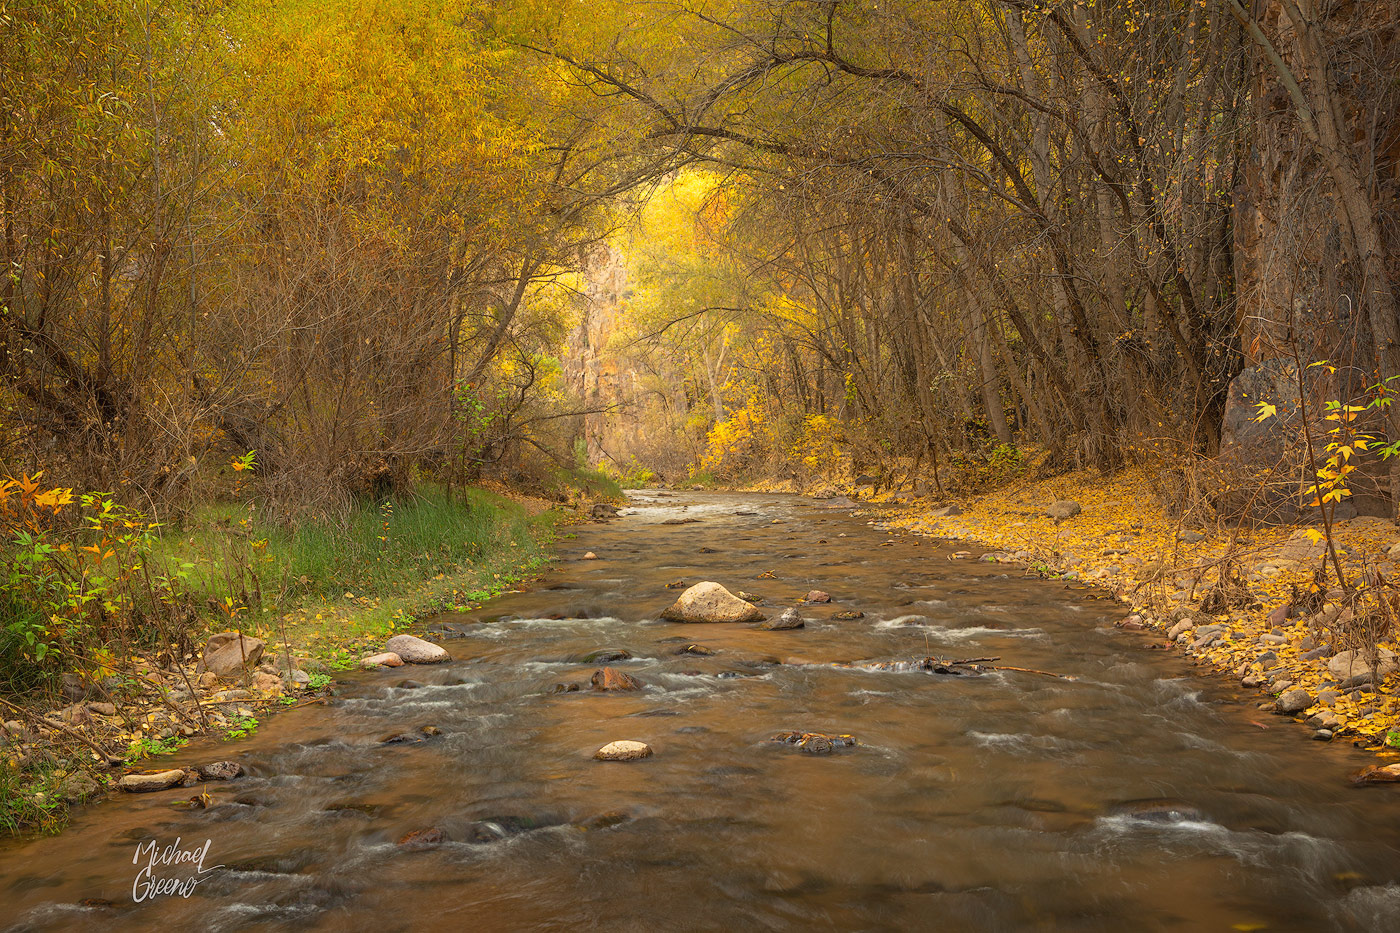 A beautiful creek cascades through an intimate canyon of stunning fall foliage in Central Arizona.